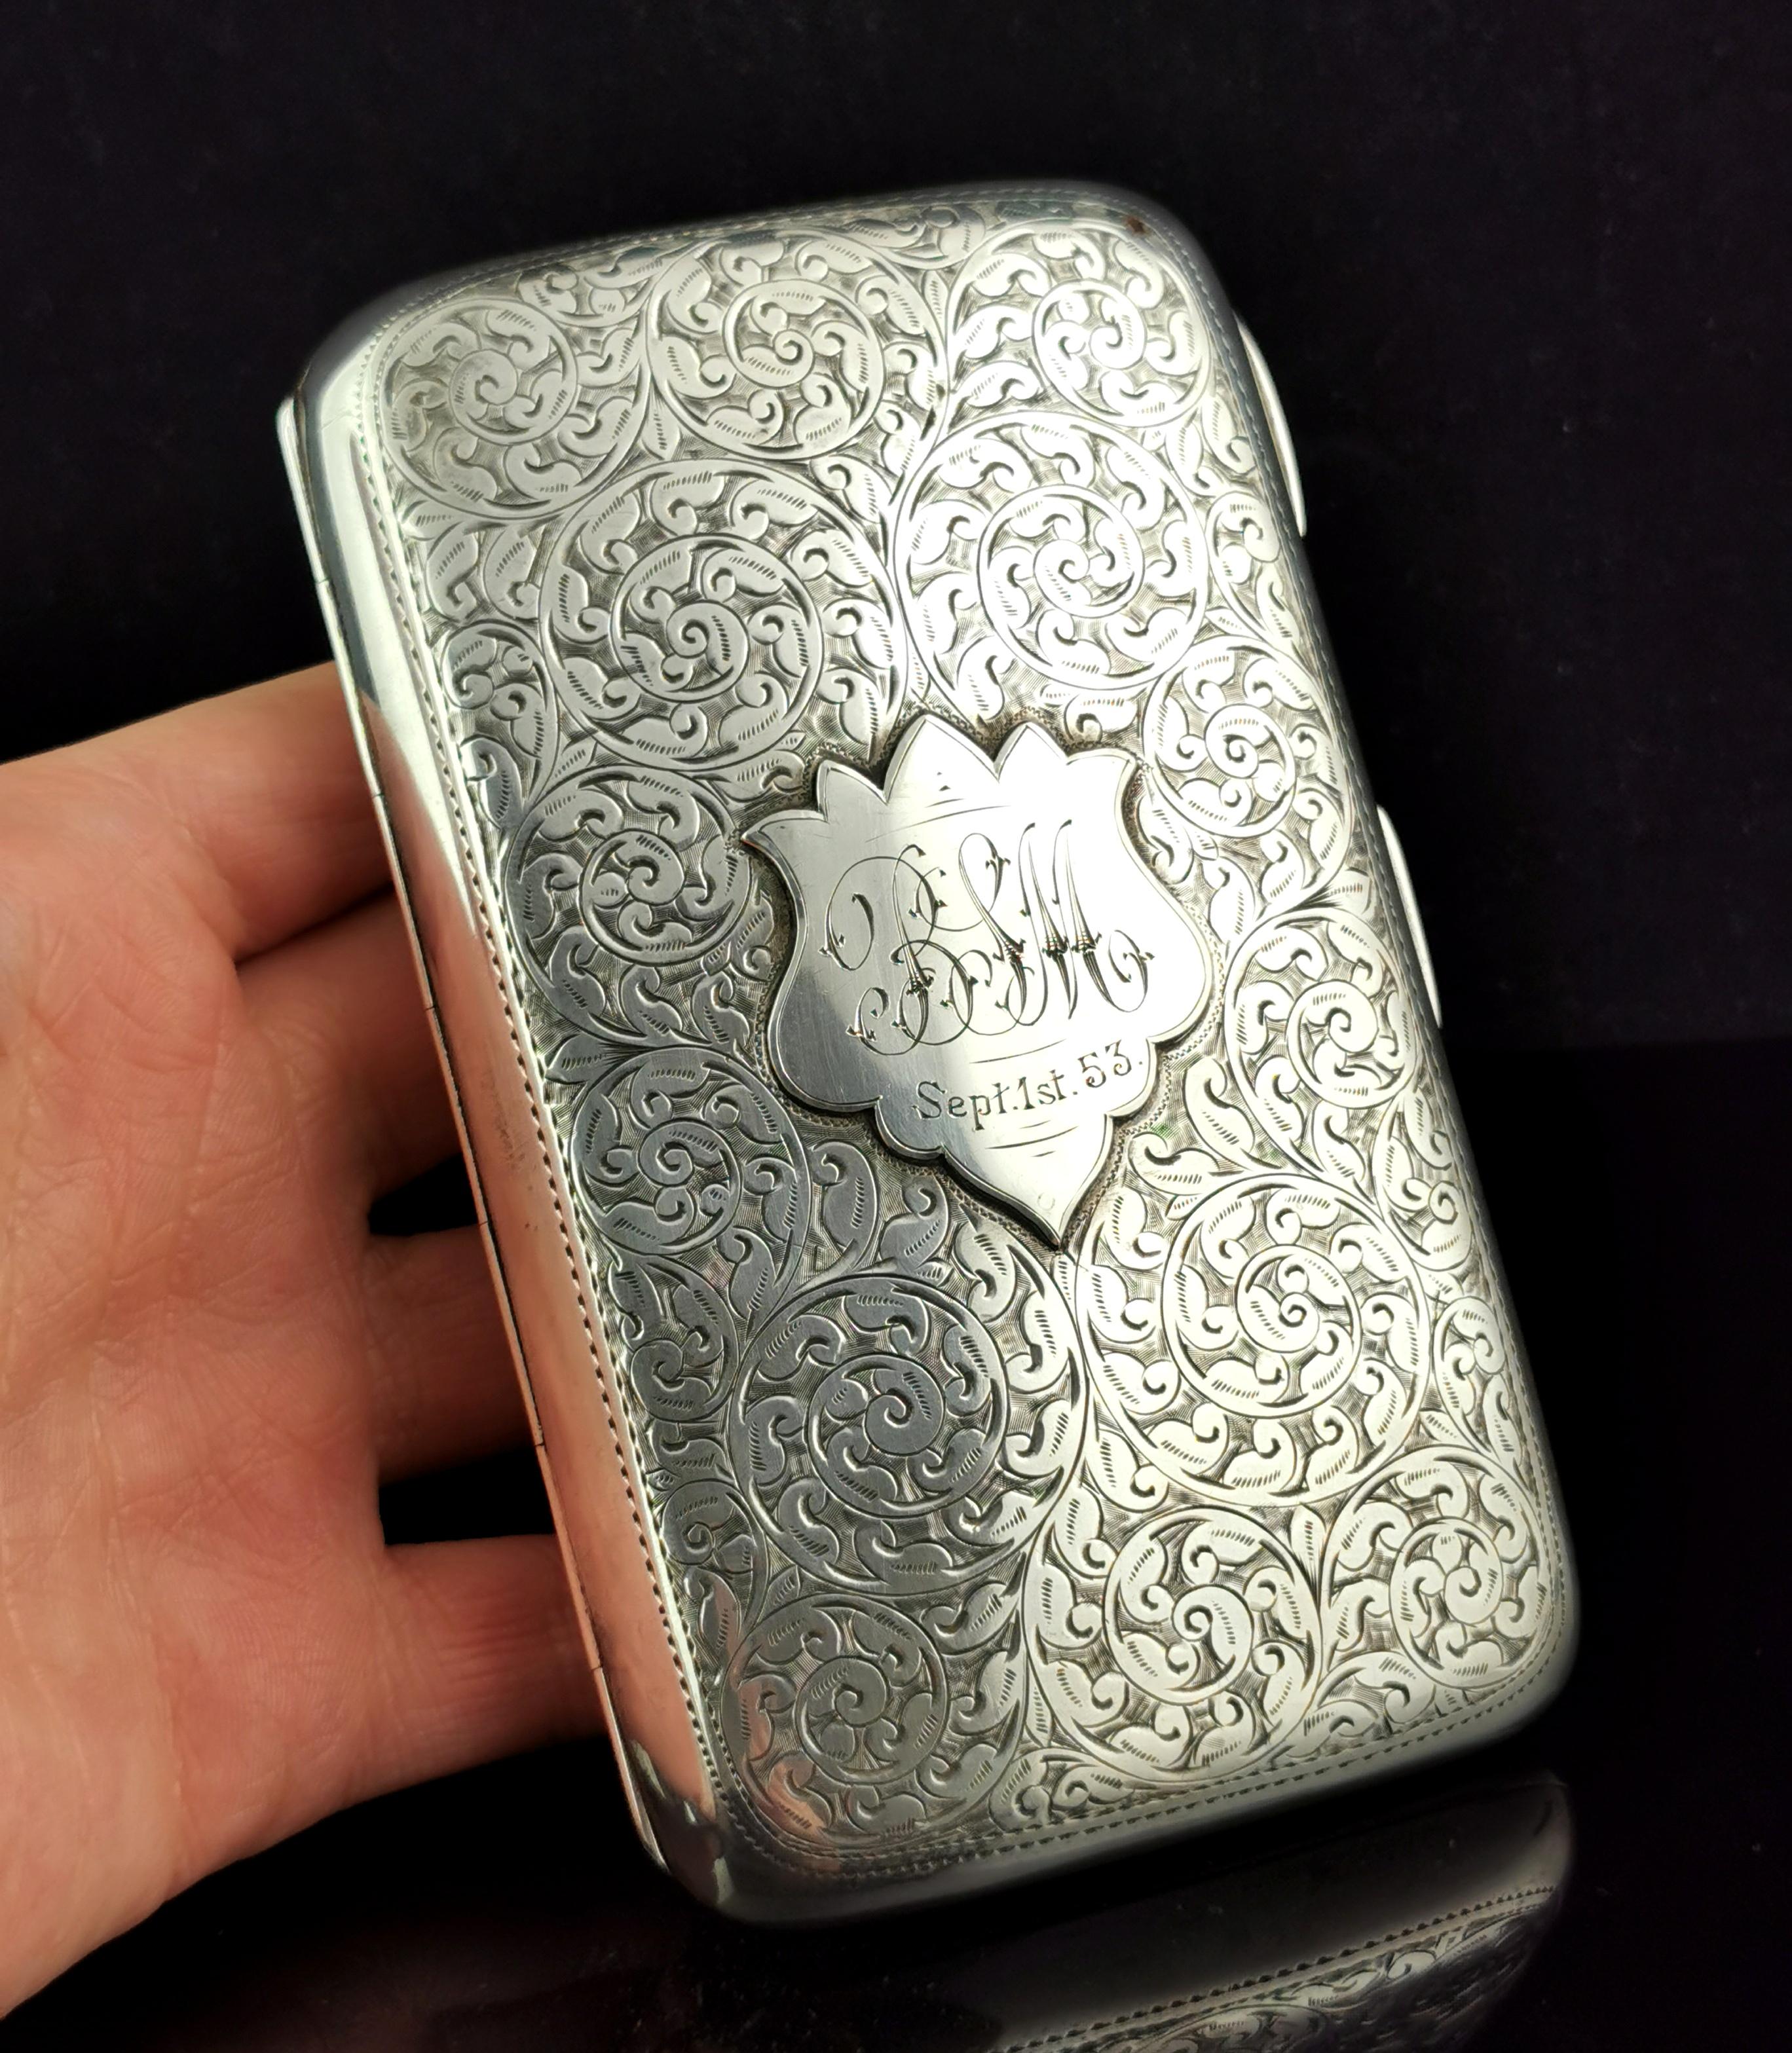 An attractive and decorative, antique sterling silver cigar case.

A lovely substantial and heavy piece, made from heavily engraved sterling silver, the case is gilt lined and still retains most of its rich gilt finish.

The engraving has a foliate